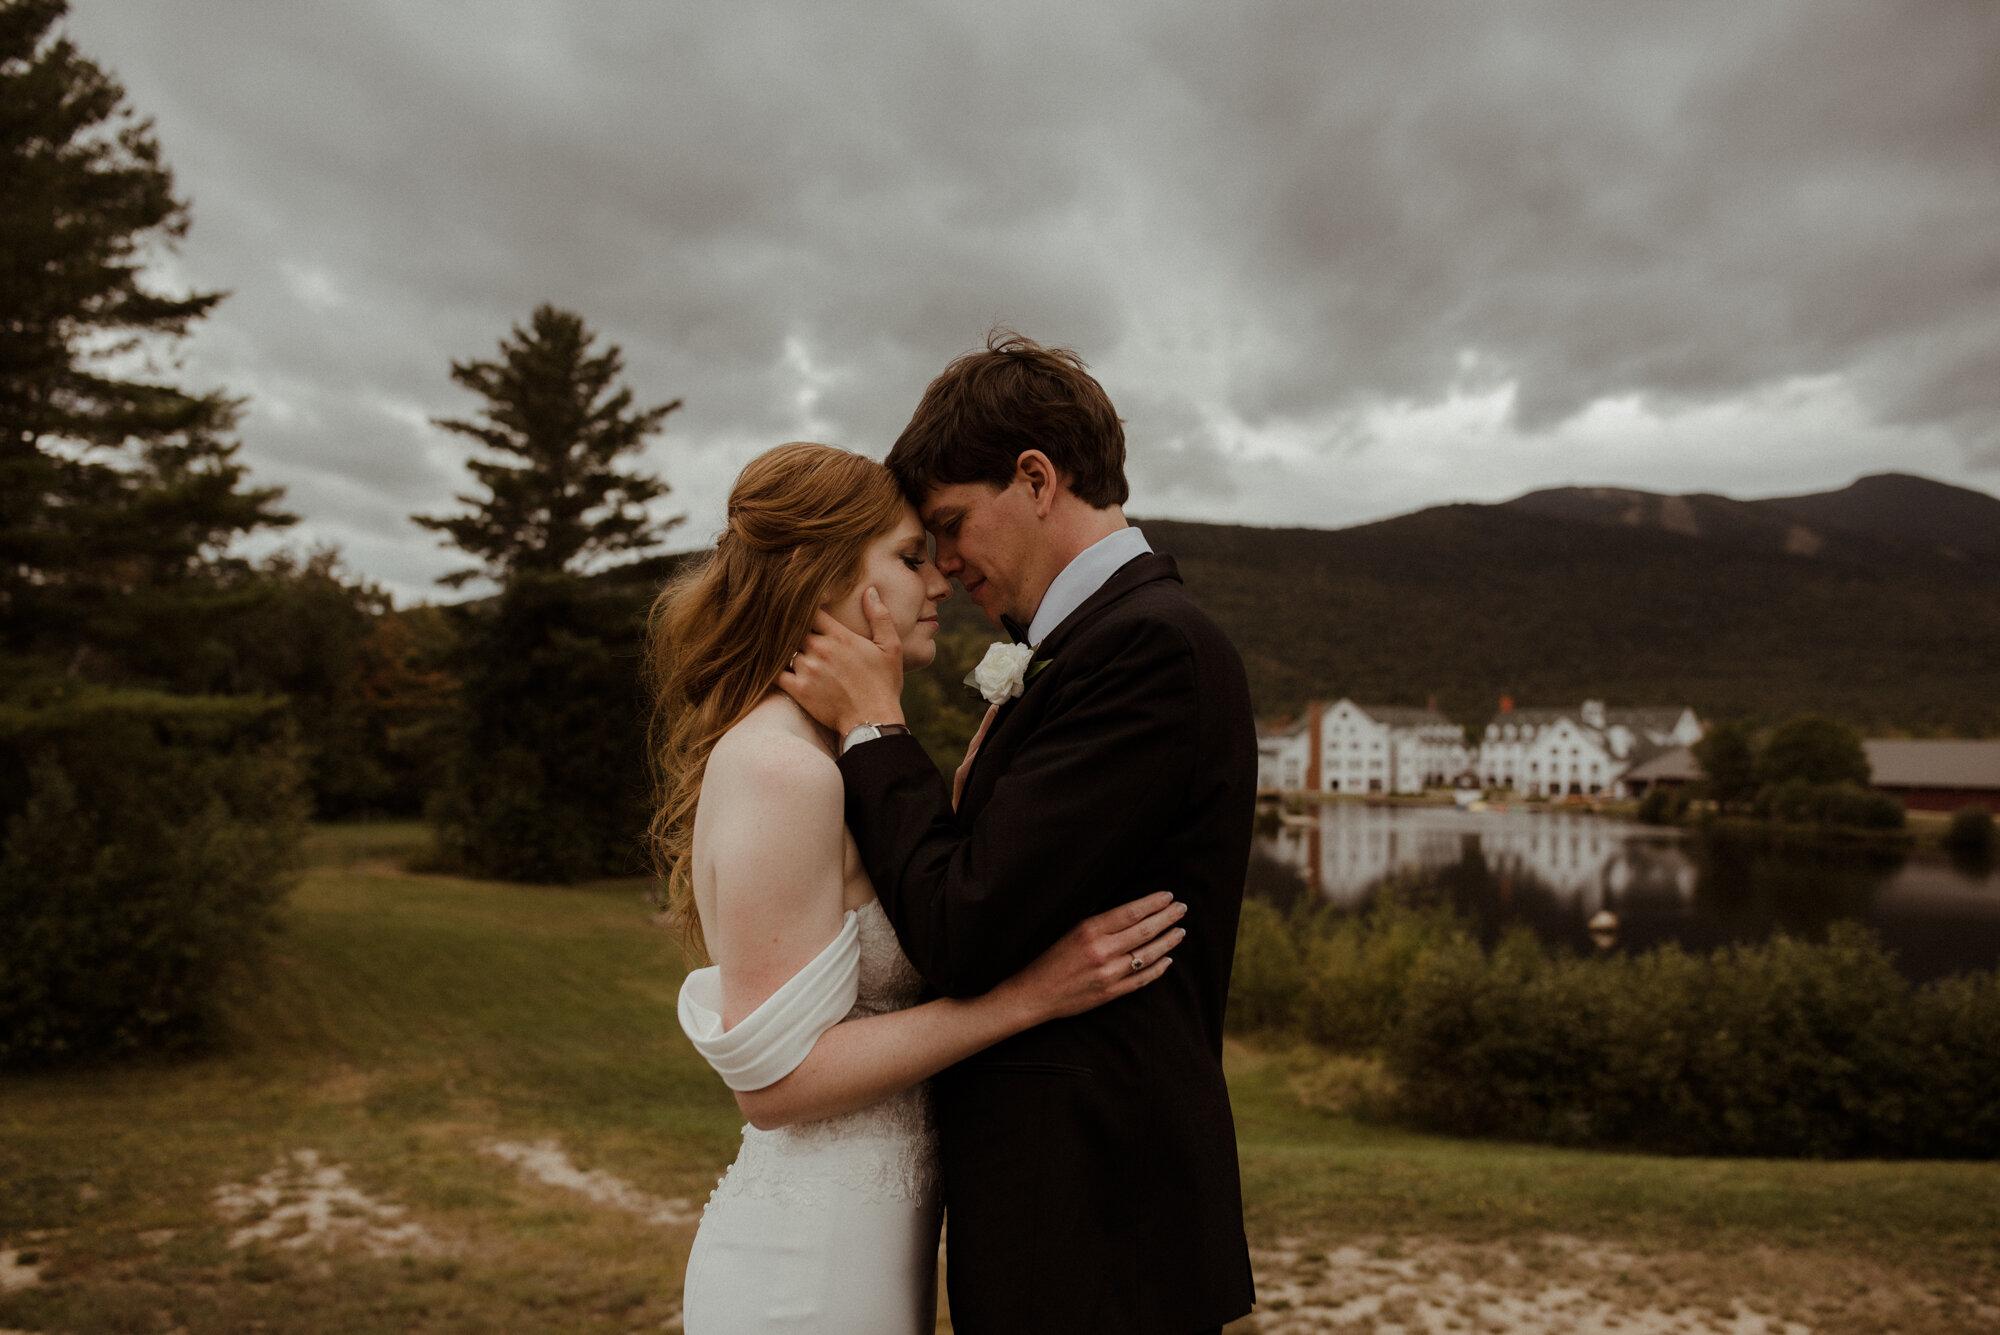 Autumn Elopement in New Hampshire - Backyard Wedding during COVID and Sunrise Hike in Wedding Dress - White Sails Creative_87.jpg